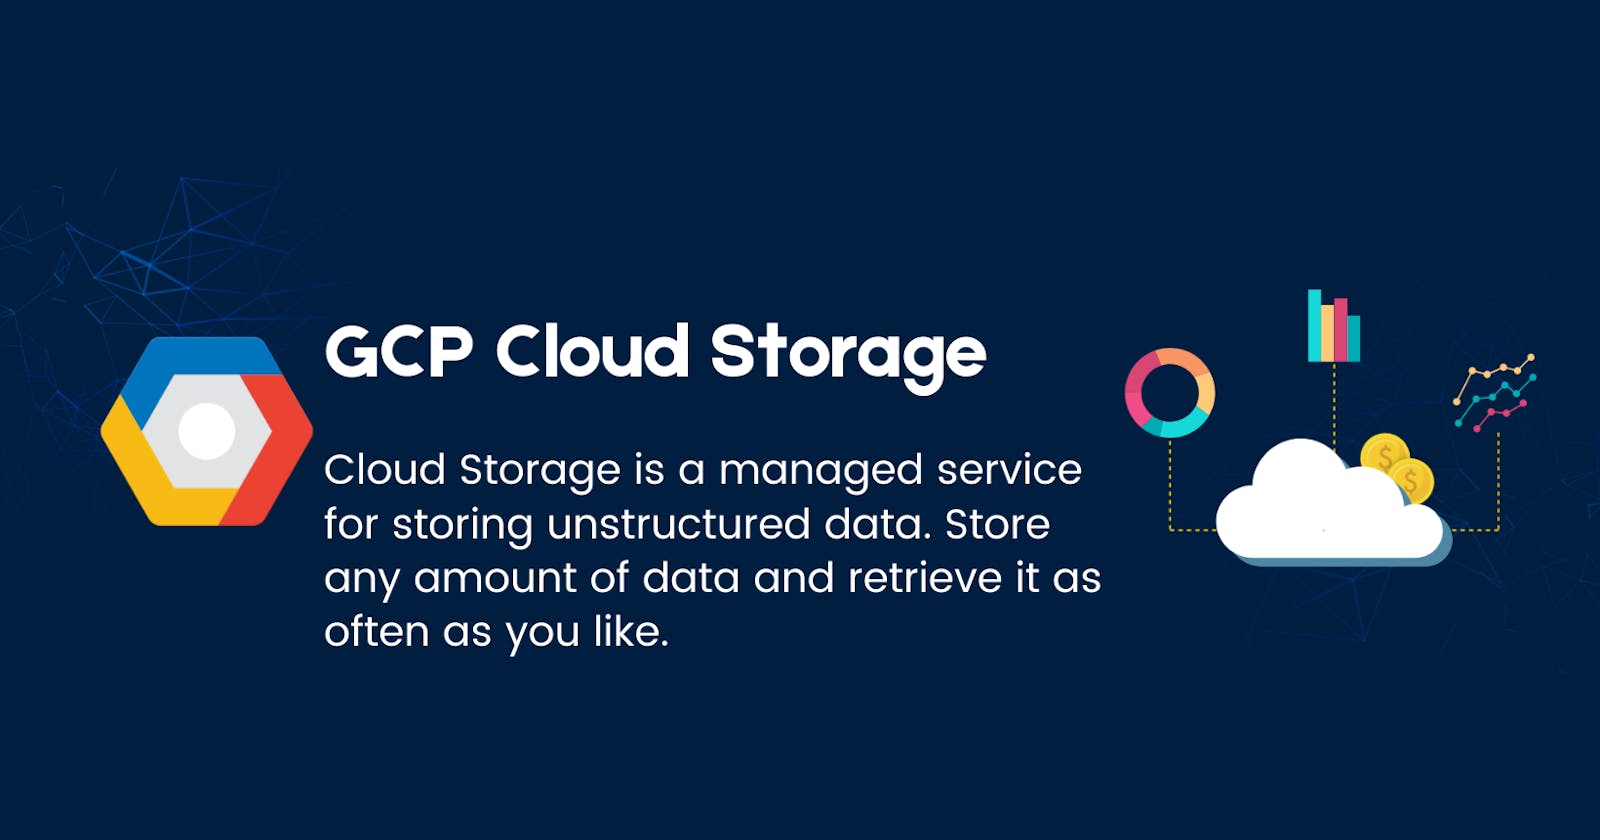 Getting Started with GCP Cloud Storage